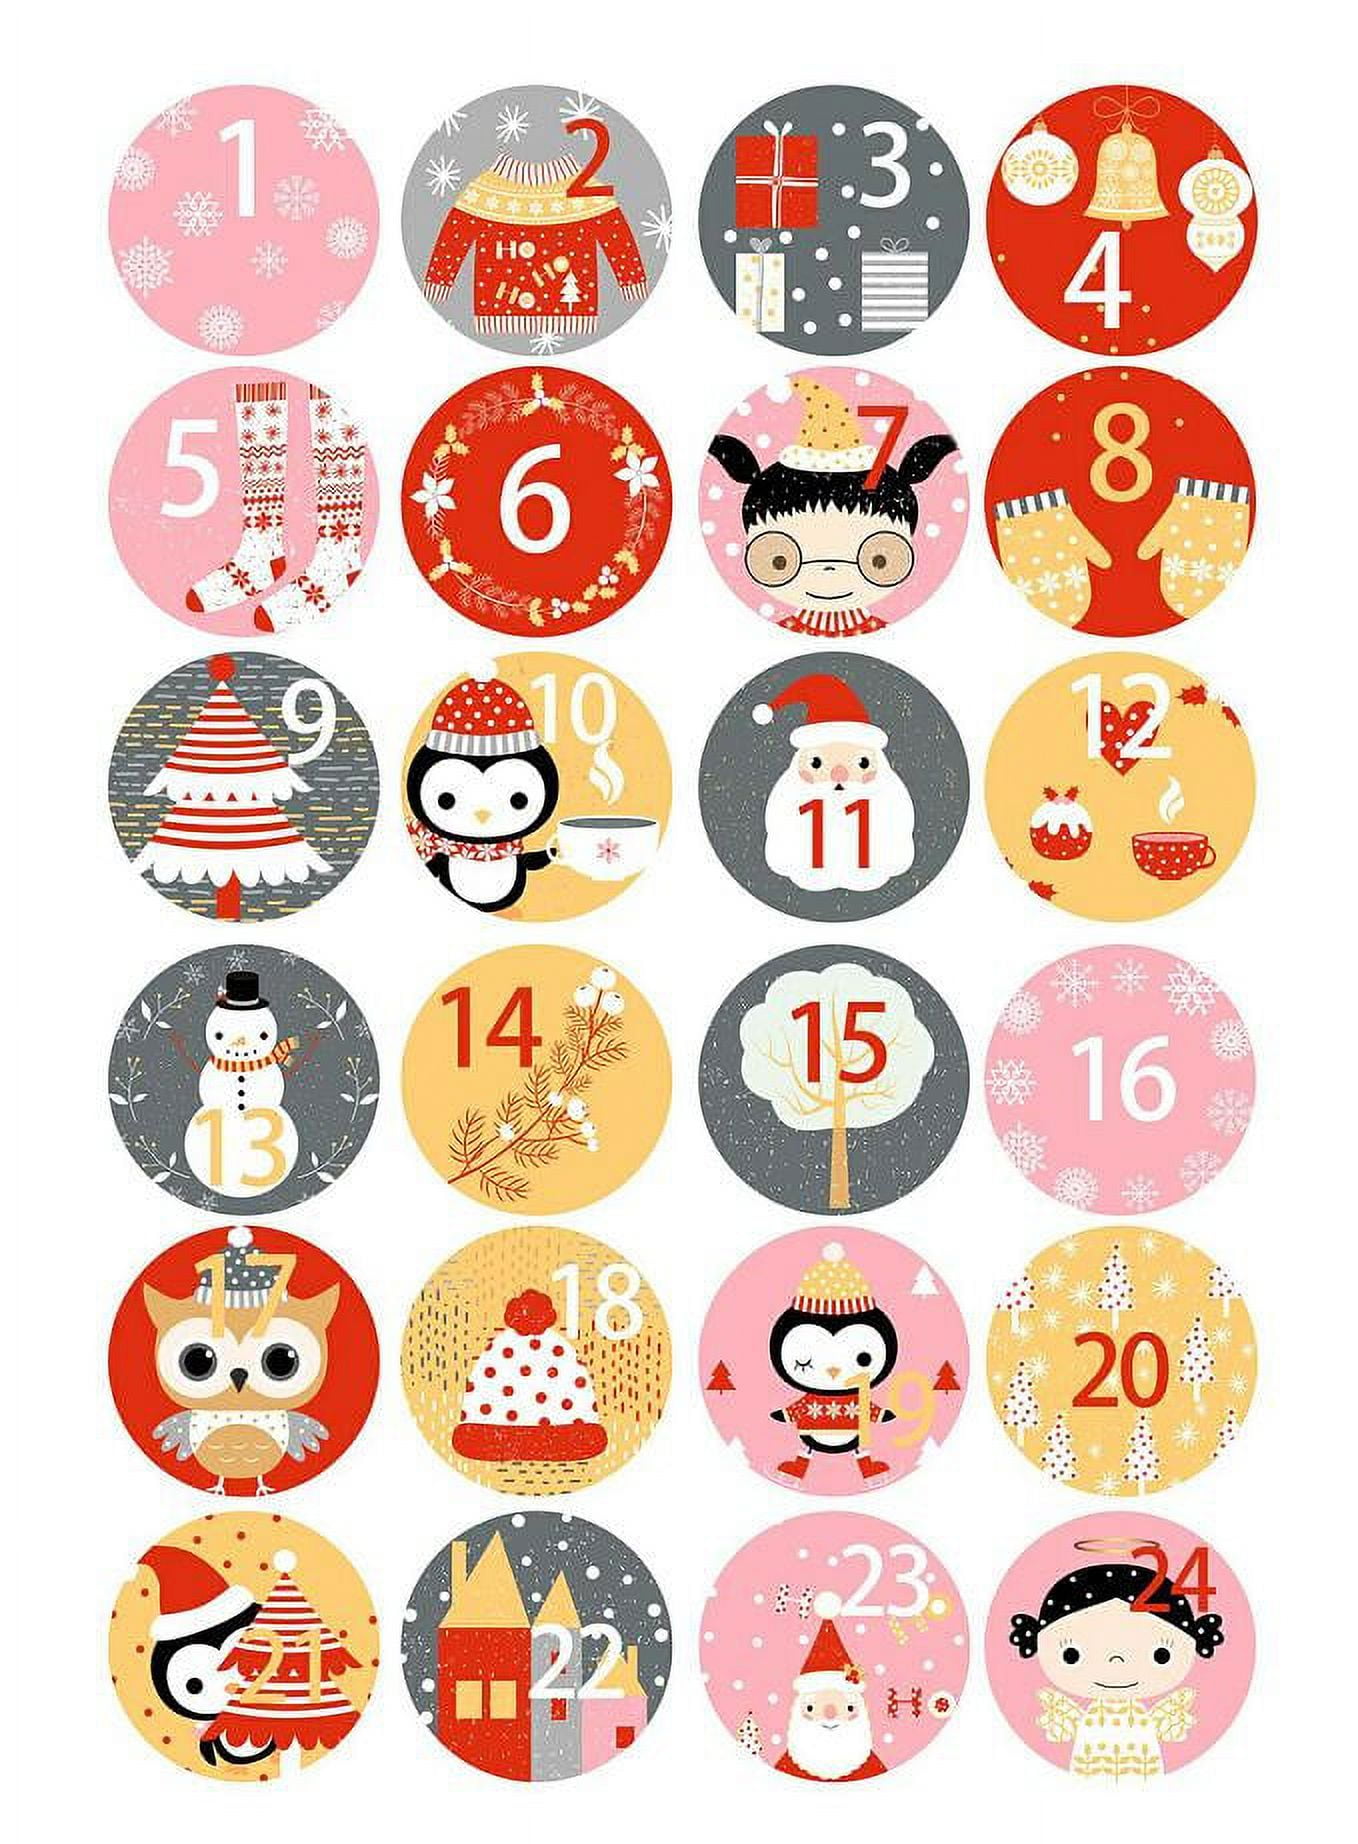 Number stickers to use on holiday countdown projectsor anything